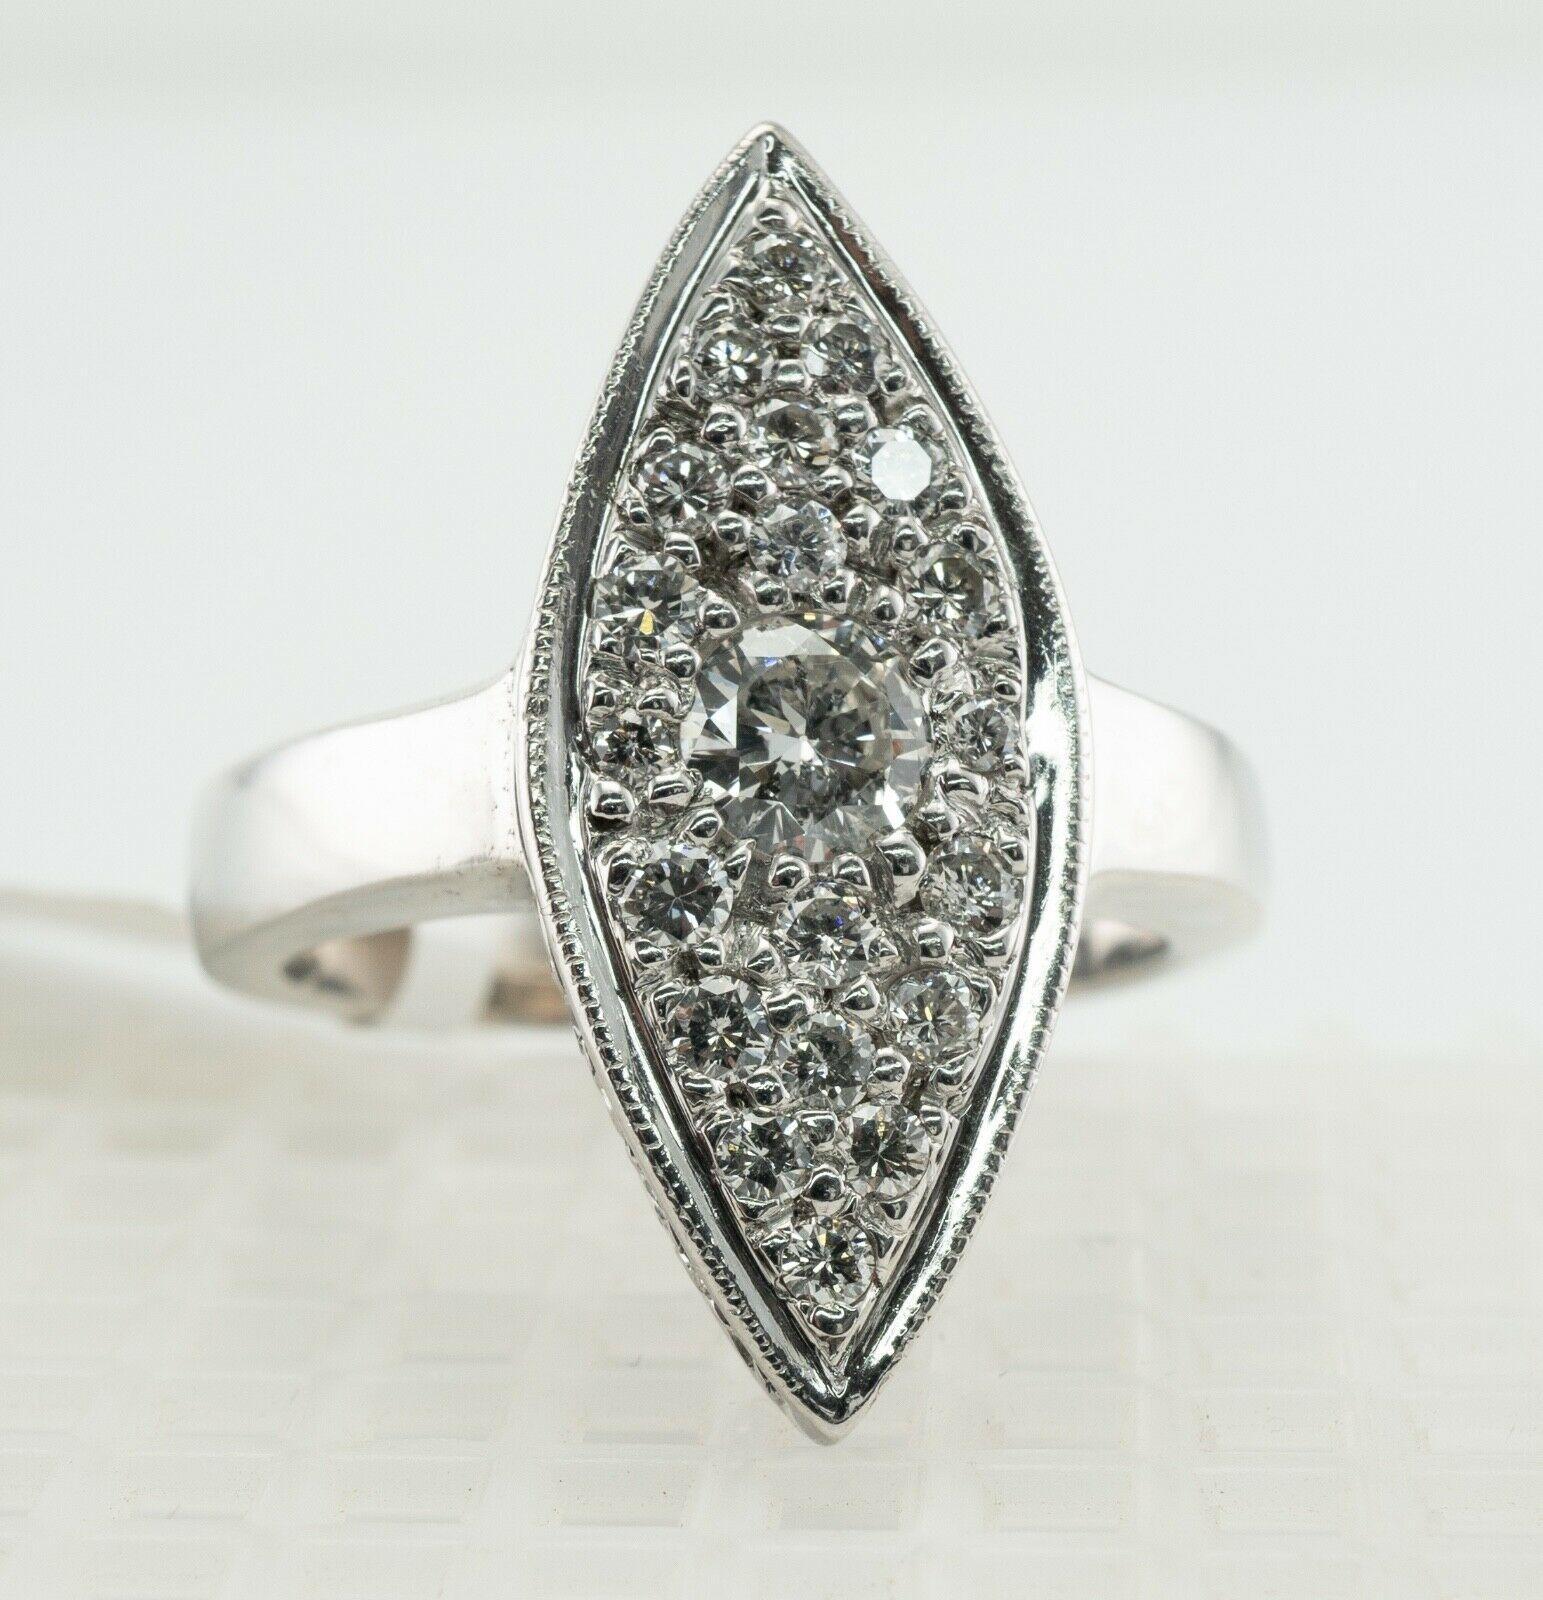 Diamond Ring 14K White Gold Vintage Marquise Shape

This vintage ring is crafted in solid 14K White Gold (carefully tested and guaranteed).
It still has a $3480 tag from estate auction.
The center round brilliant cut diamond is .20 carat of I2